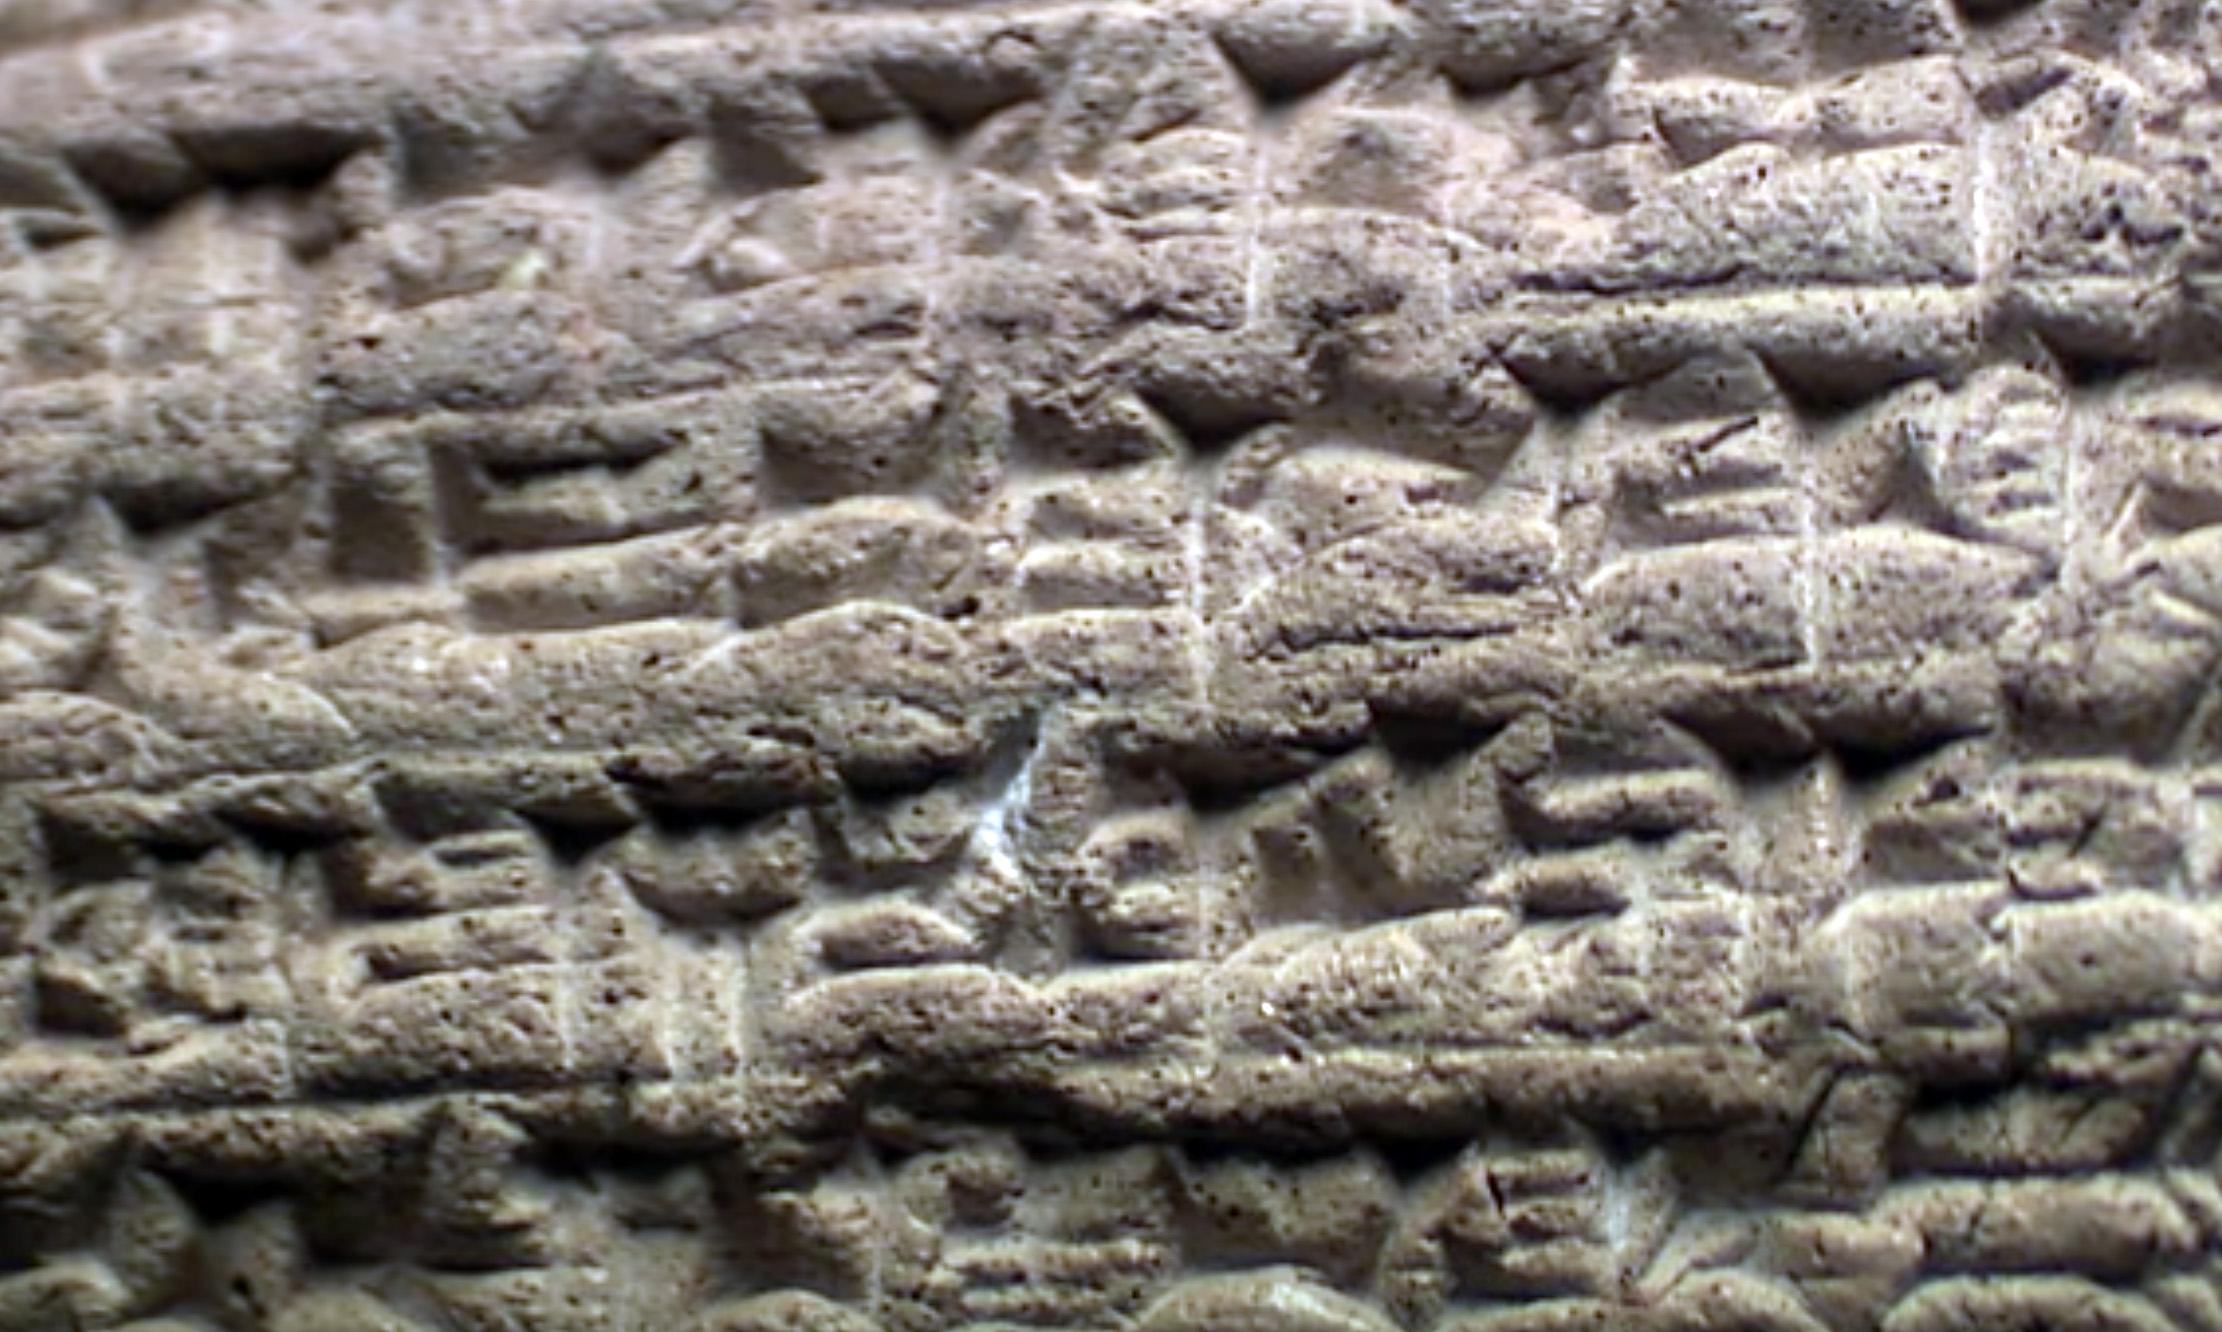 Writing Cuneiform, a video from The British Museum